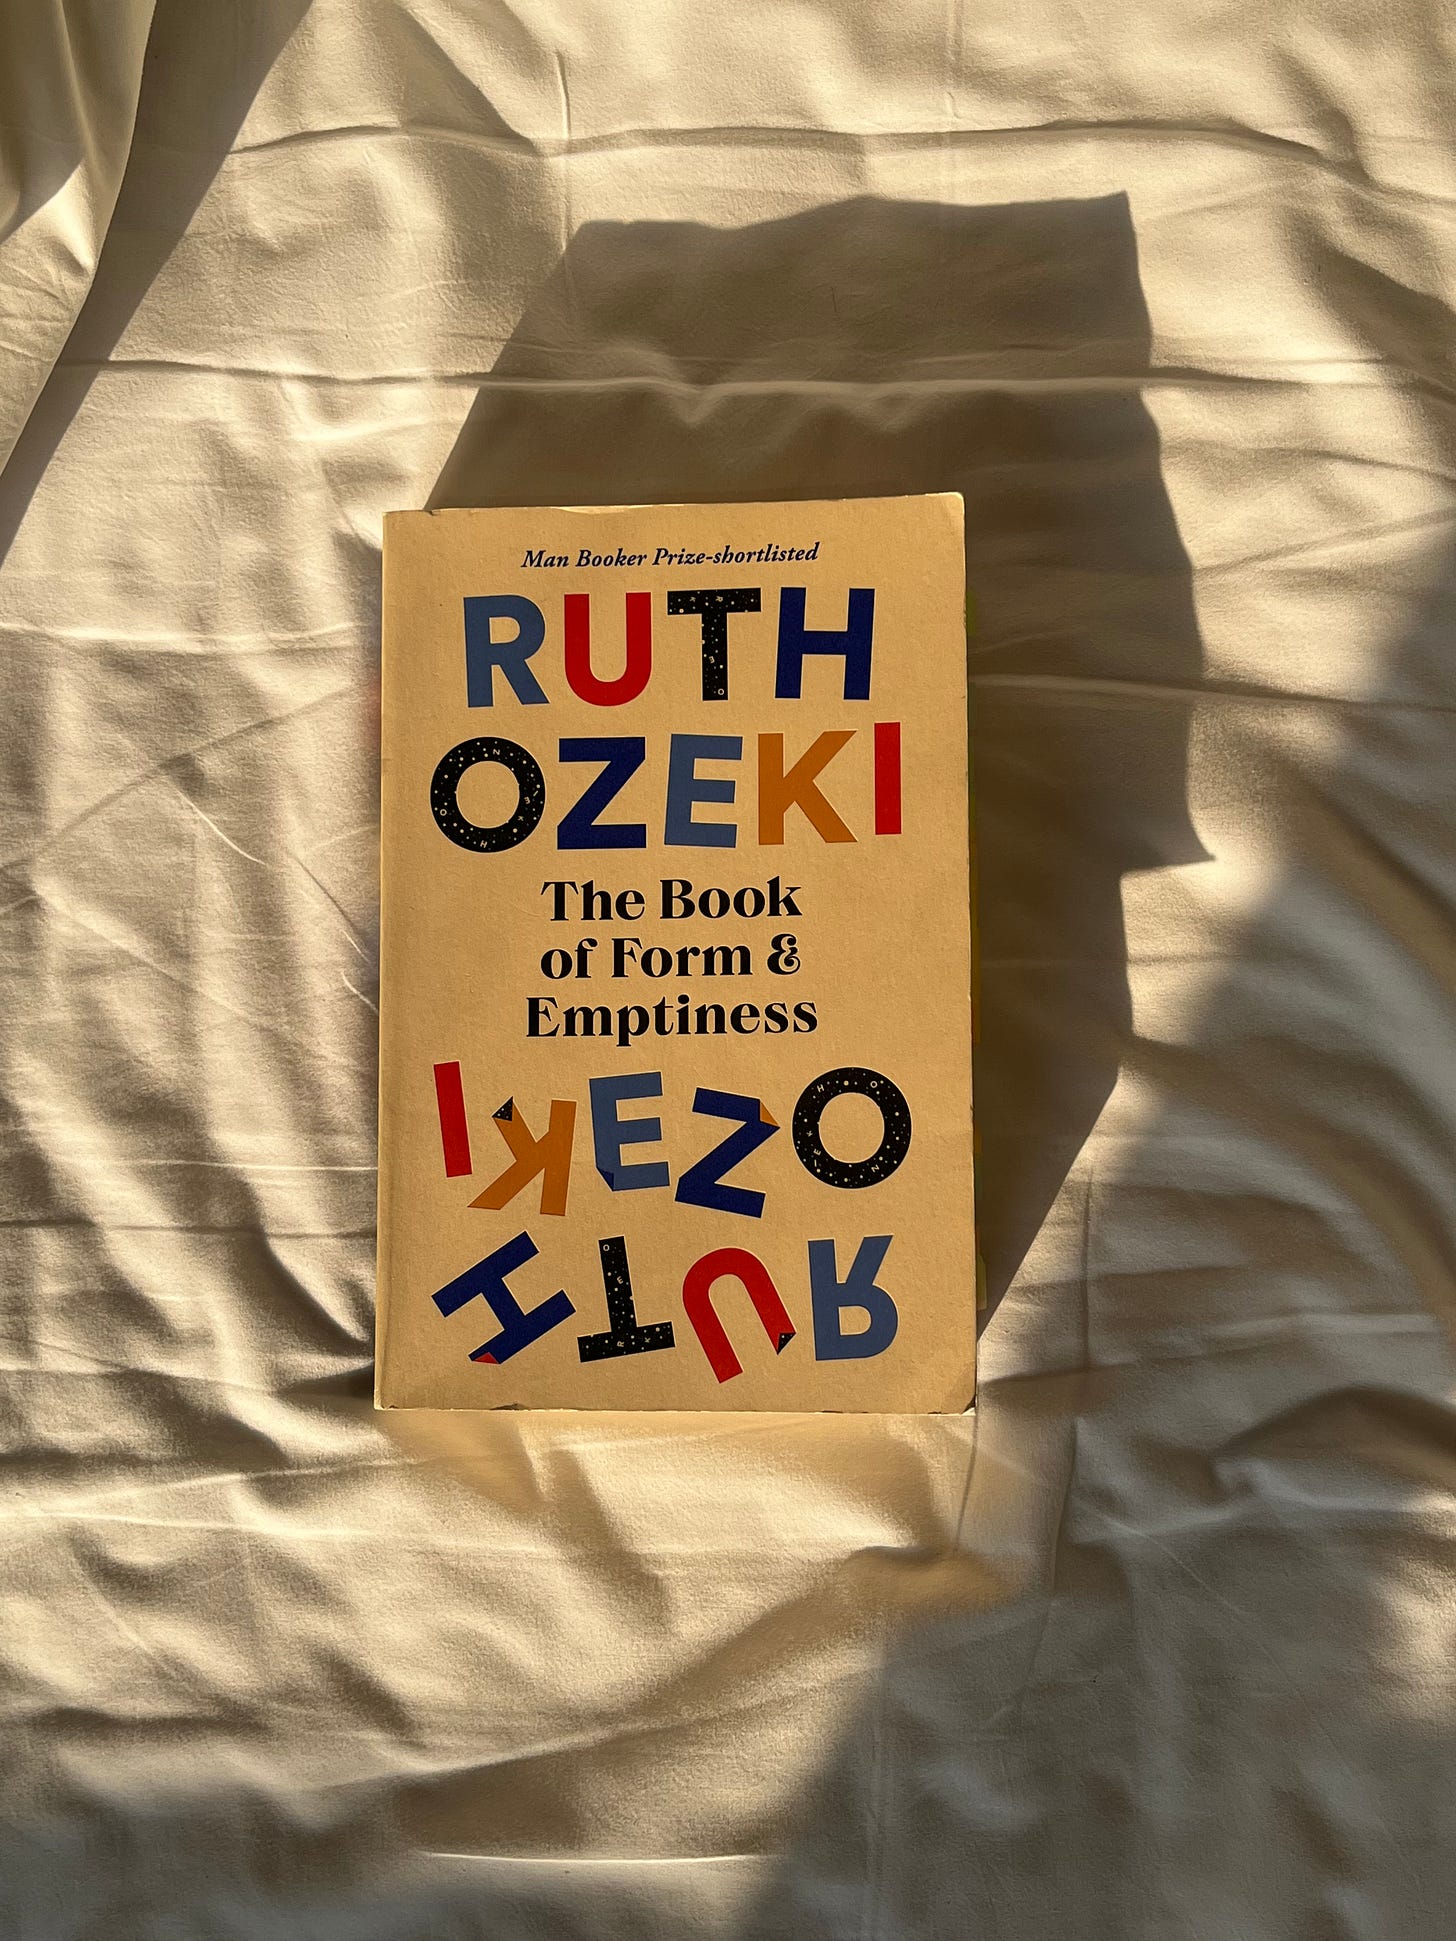 Ruth Ozeki won the Women’s Prize for Fiction 2022 for her book ‘The Book of Form and Forgetting’